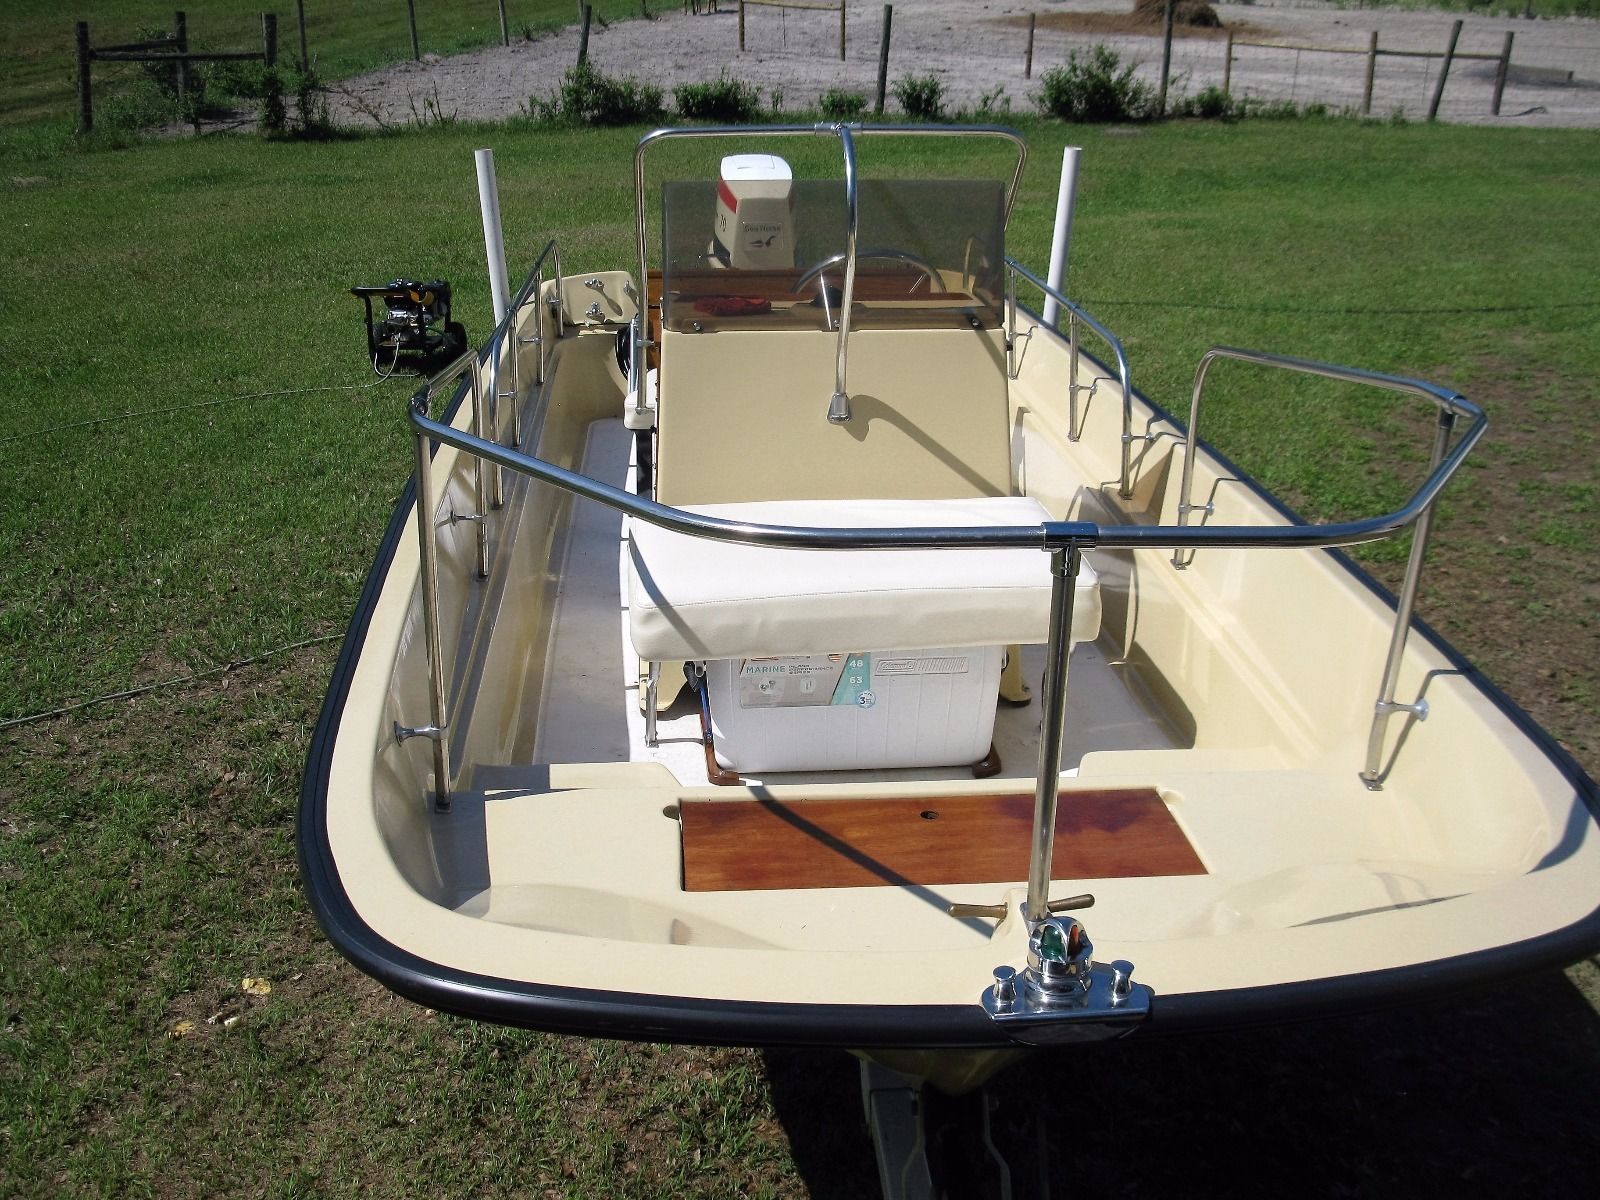 Boston Whaler 1975 for sale for 11,500